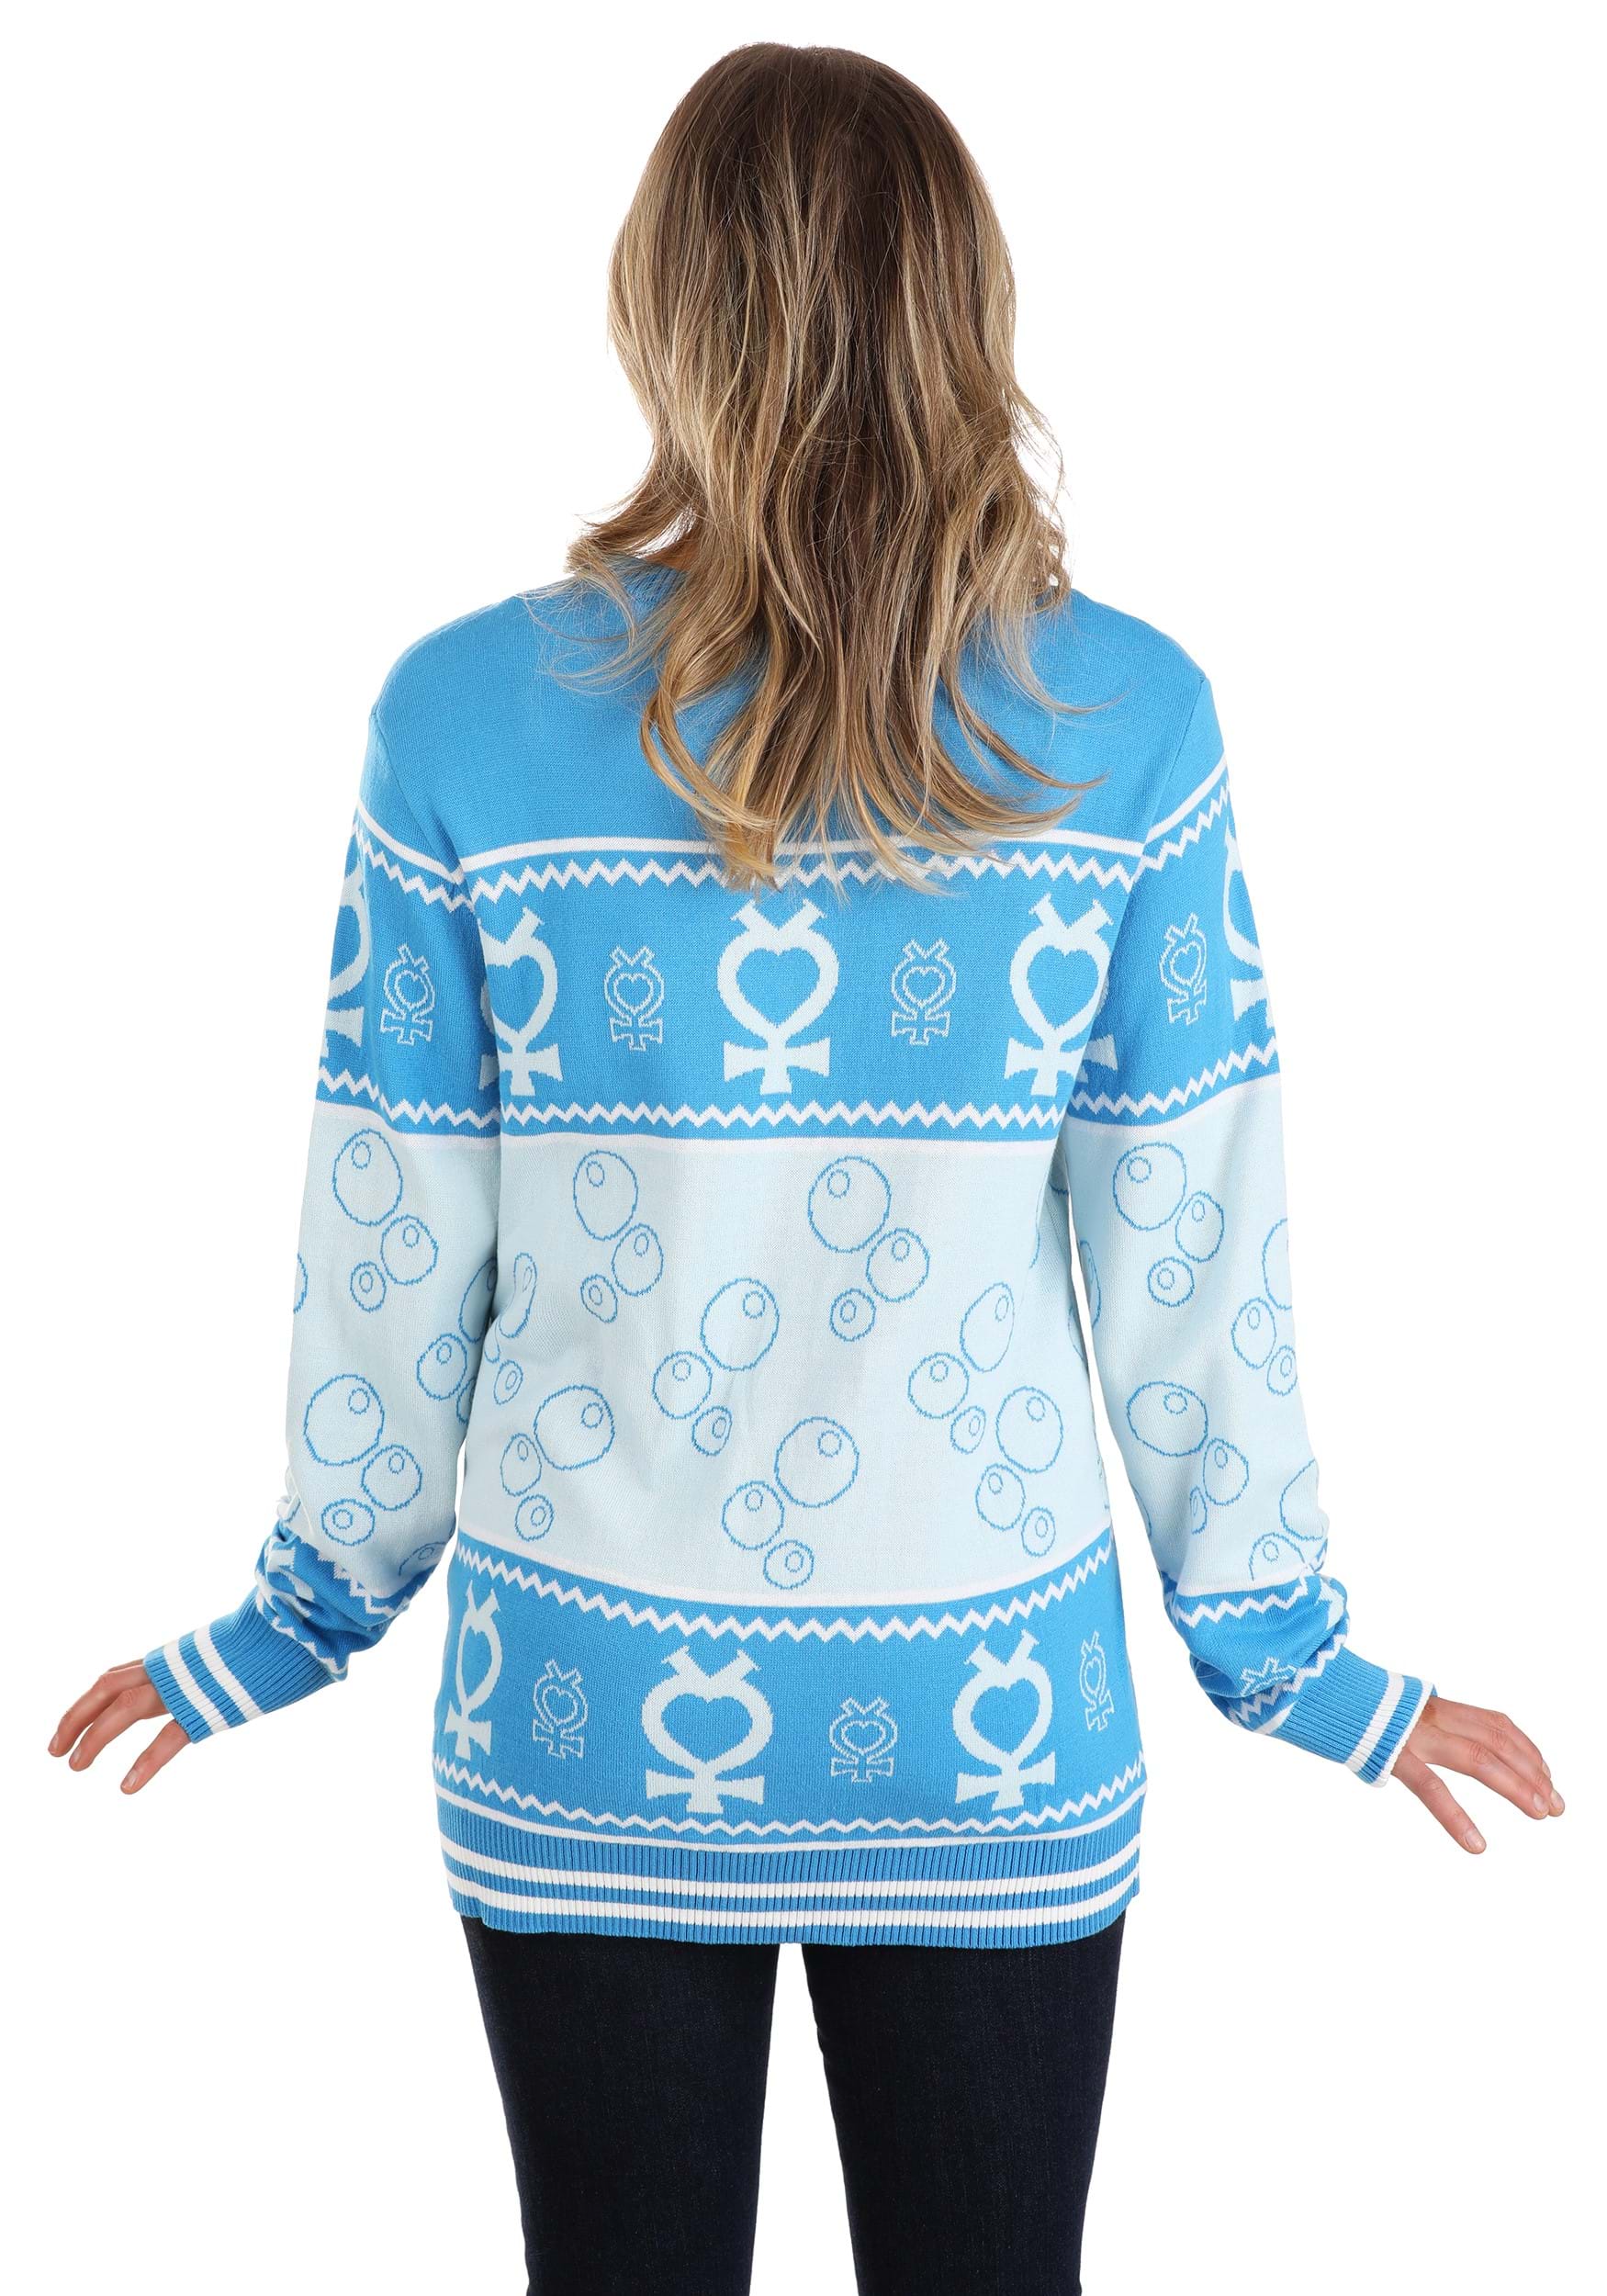 Sailor Mercury Ugly Sweater For Adults